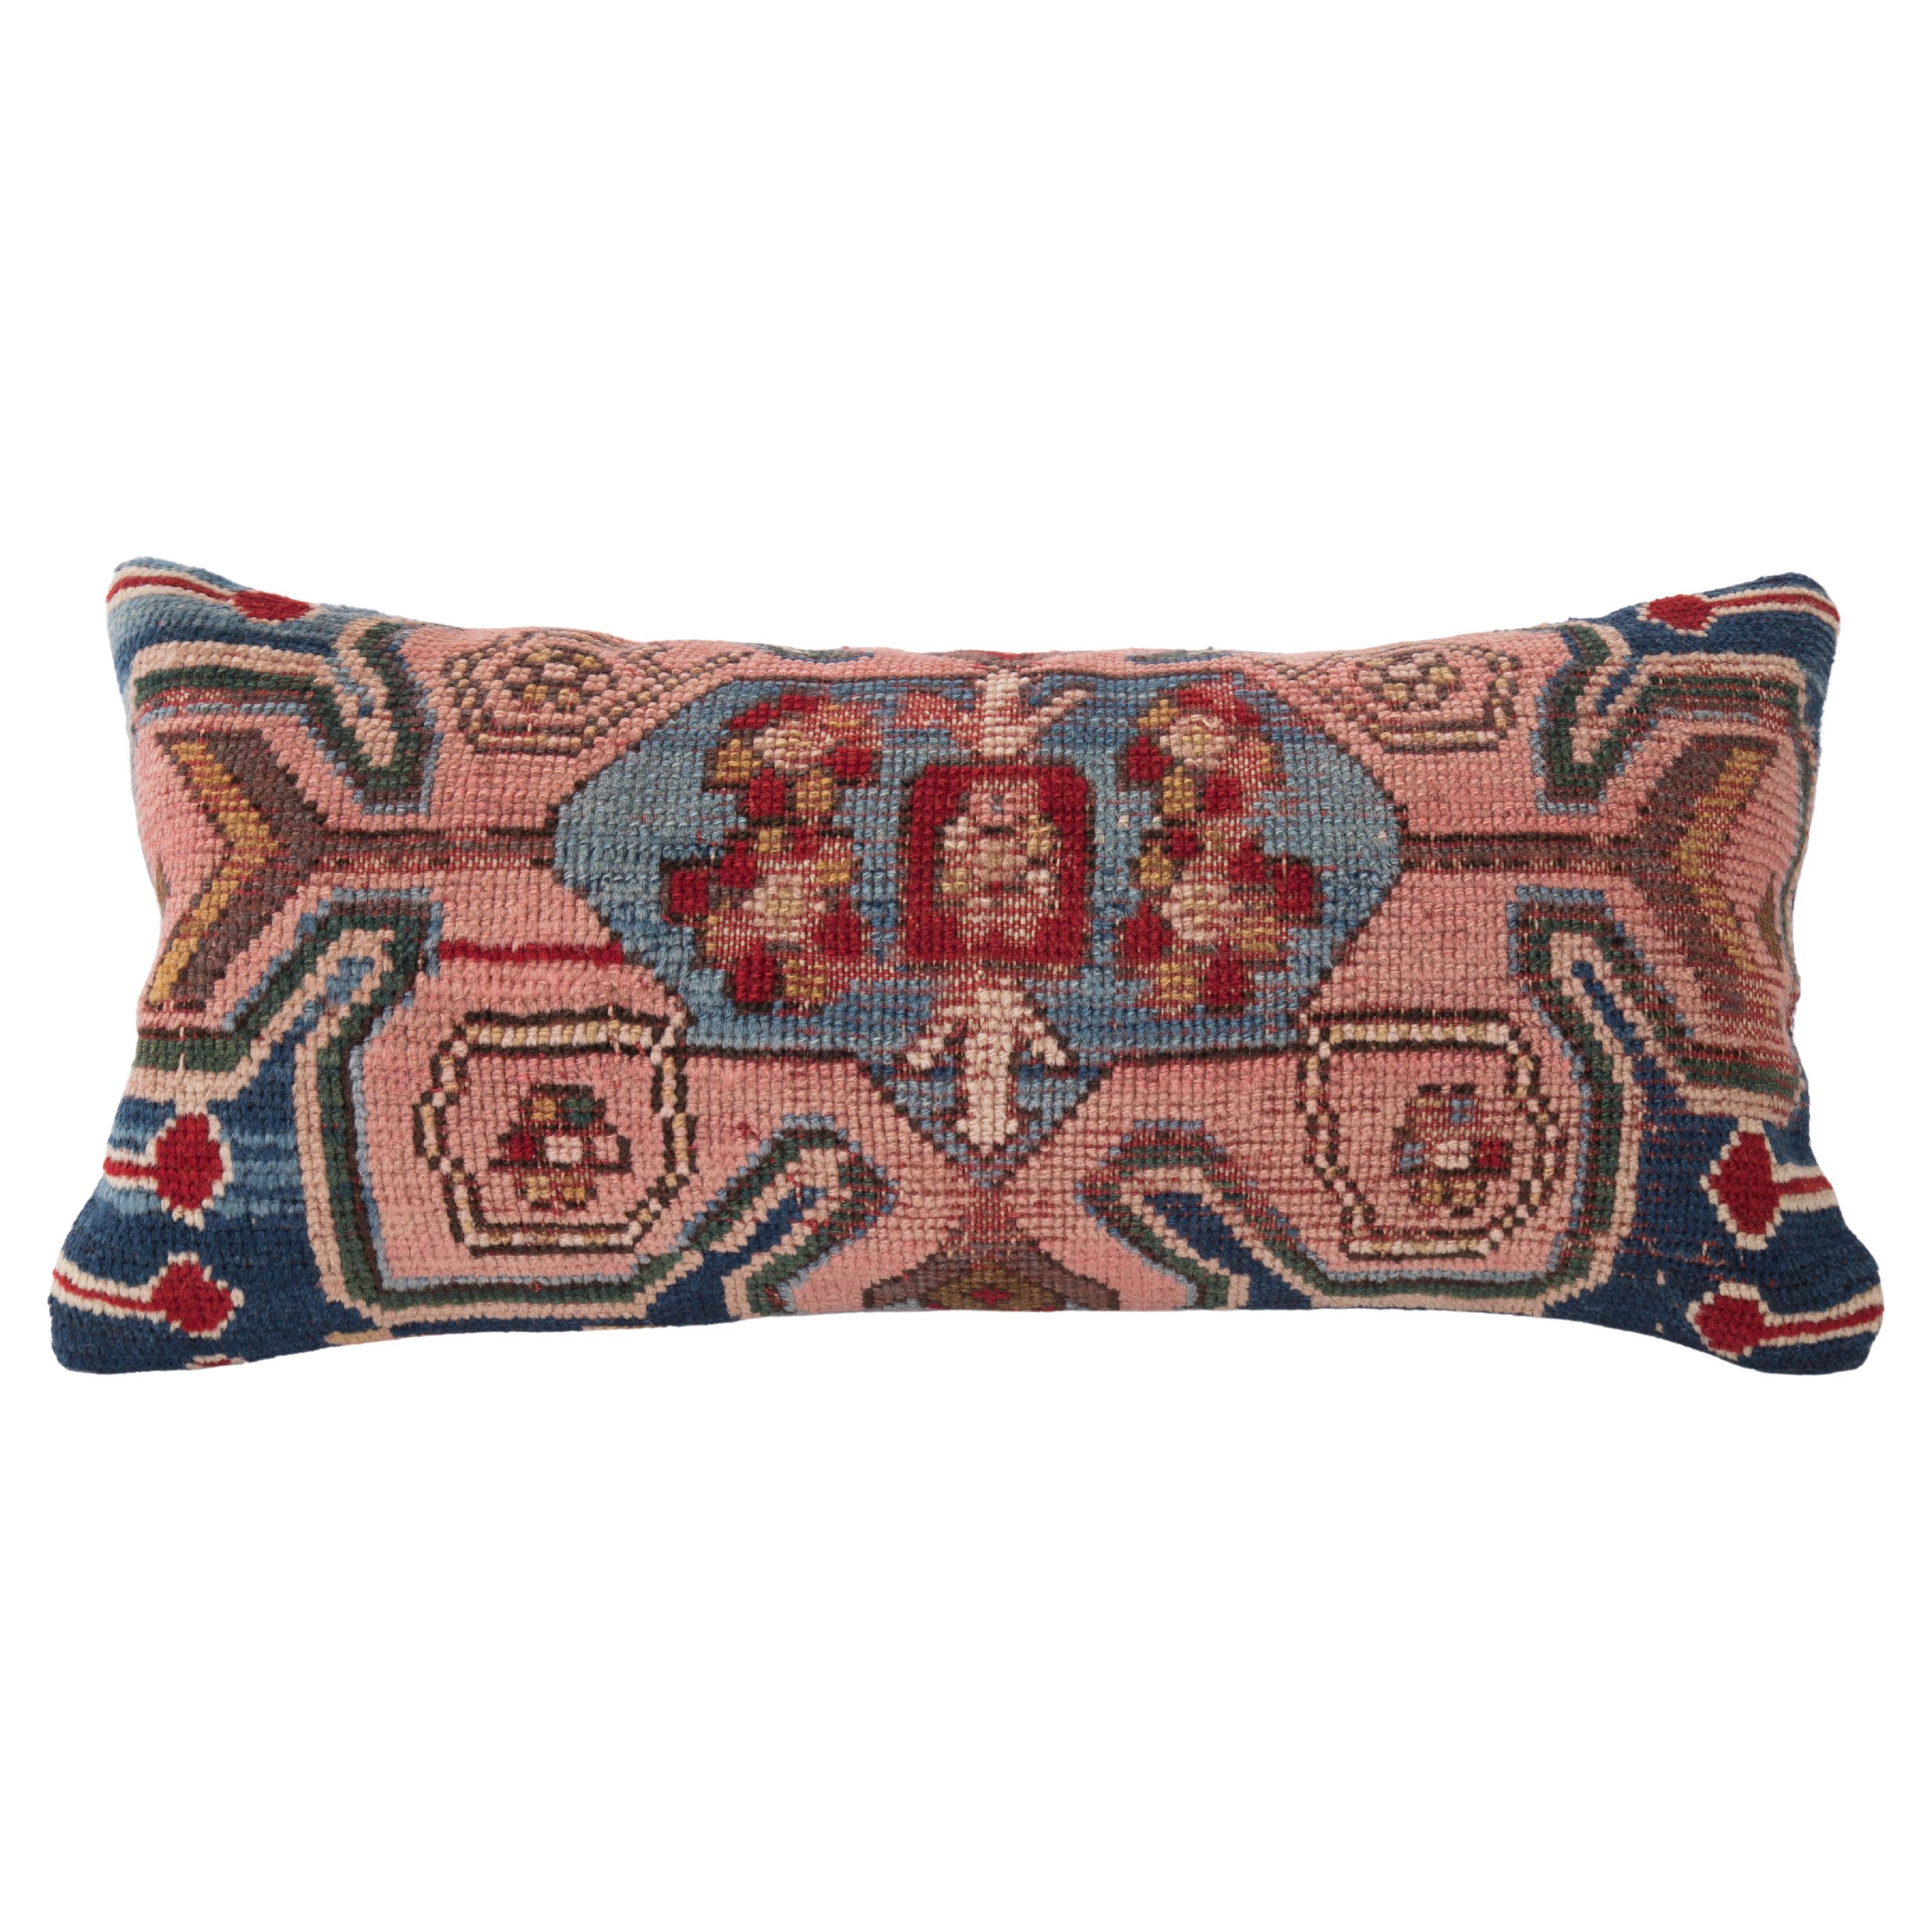 Pillow Cover Made from an Antique Caucasian Rug Fragment, Late 19th C.